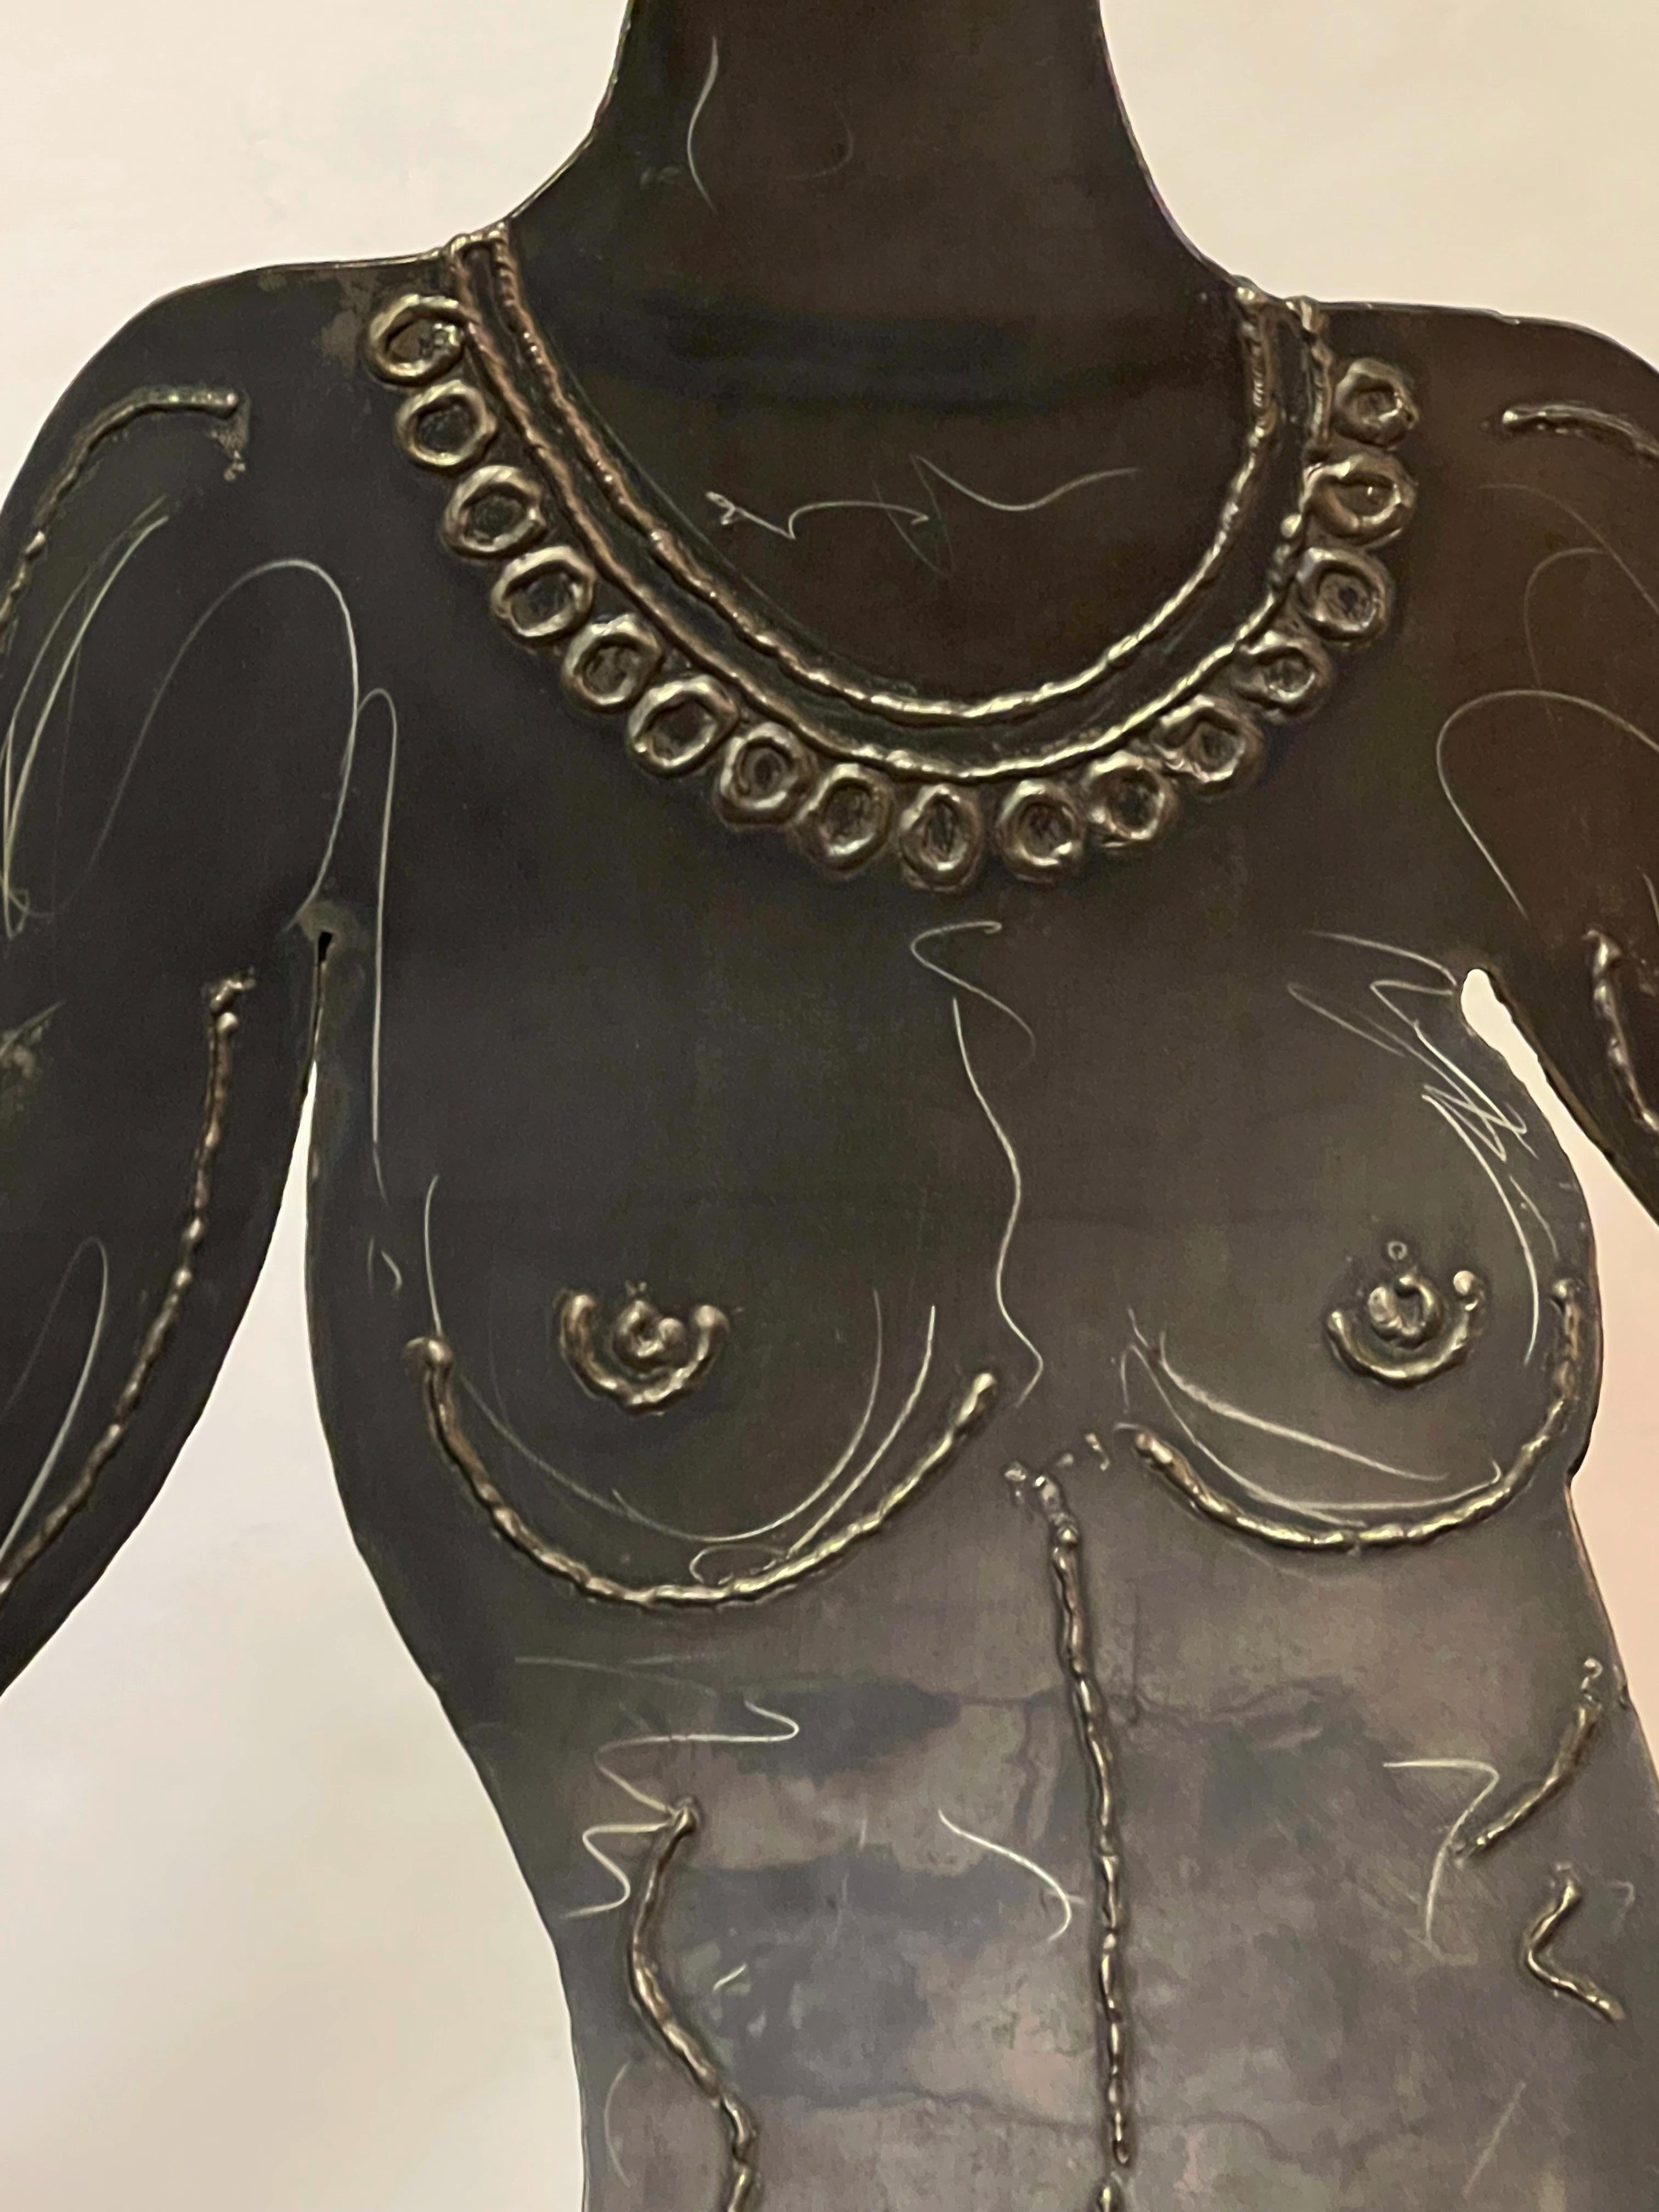 In front of Robert Lee Morris's Beverly Hills store in 1993 stood this unique life-size brass sculpture of a nude woman with a bob cut, dressed only with luxurious jewelry. The sculpture named 